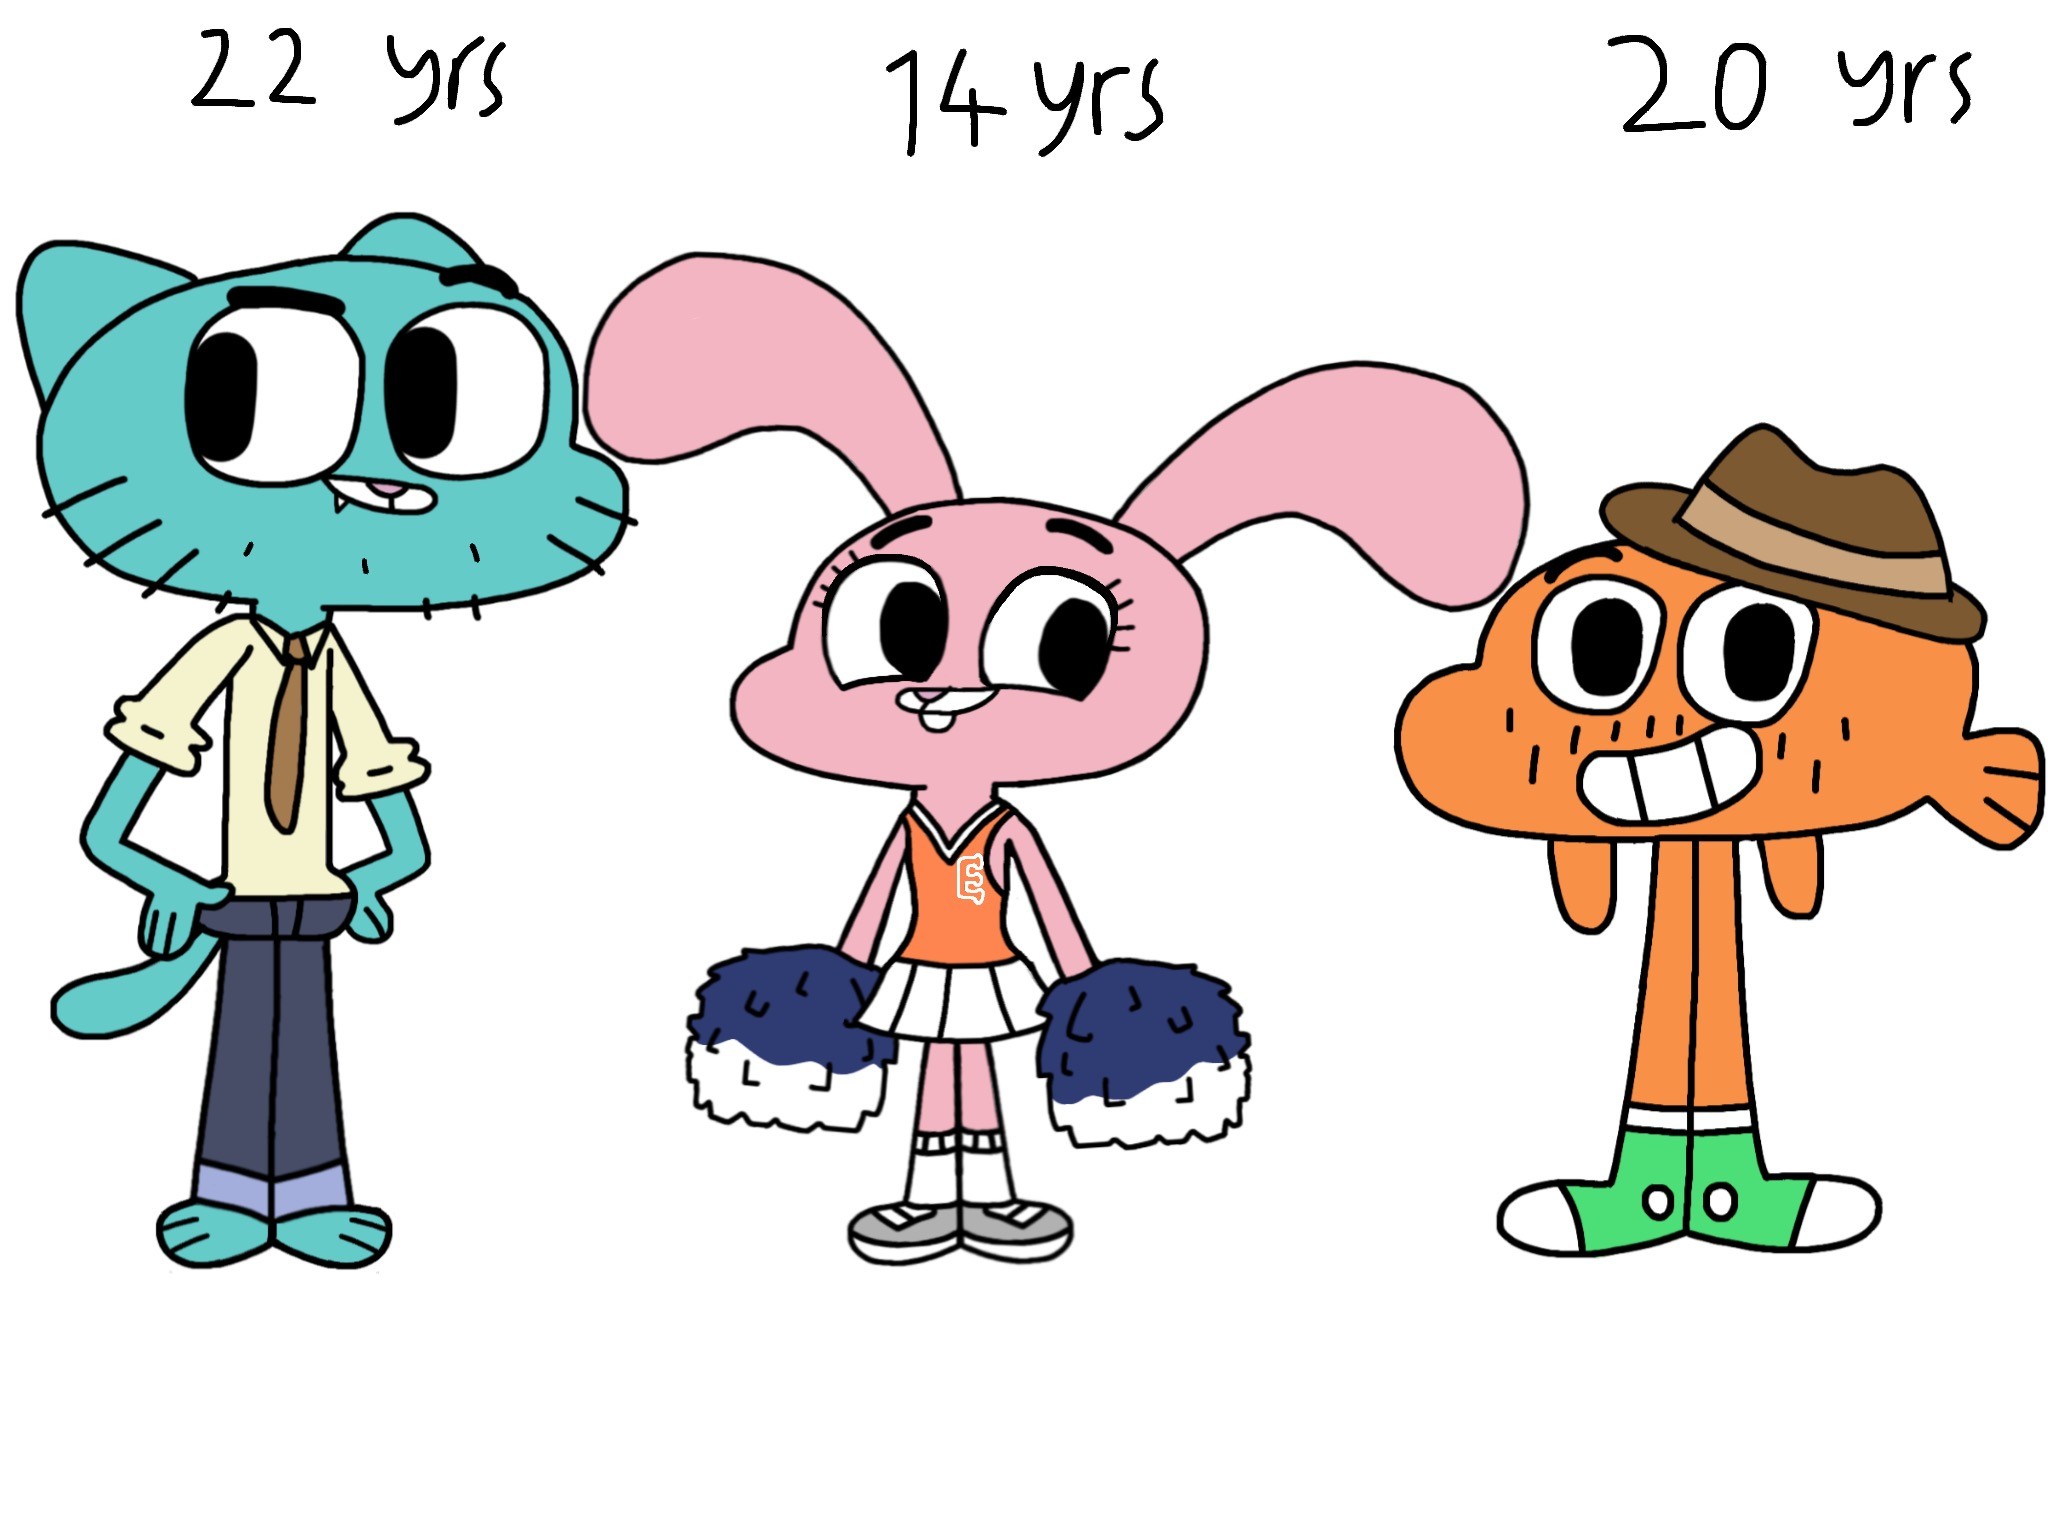 2048x1536 ... The Amazing World of Gumball 10 years later by SkyfallerArt